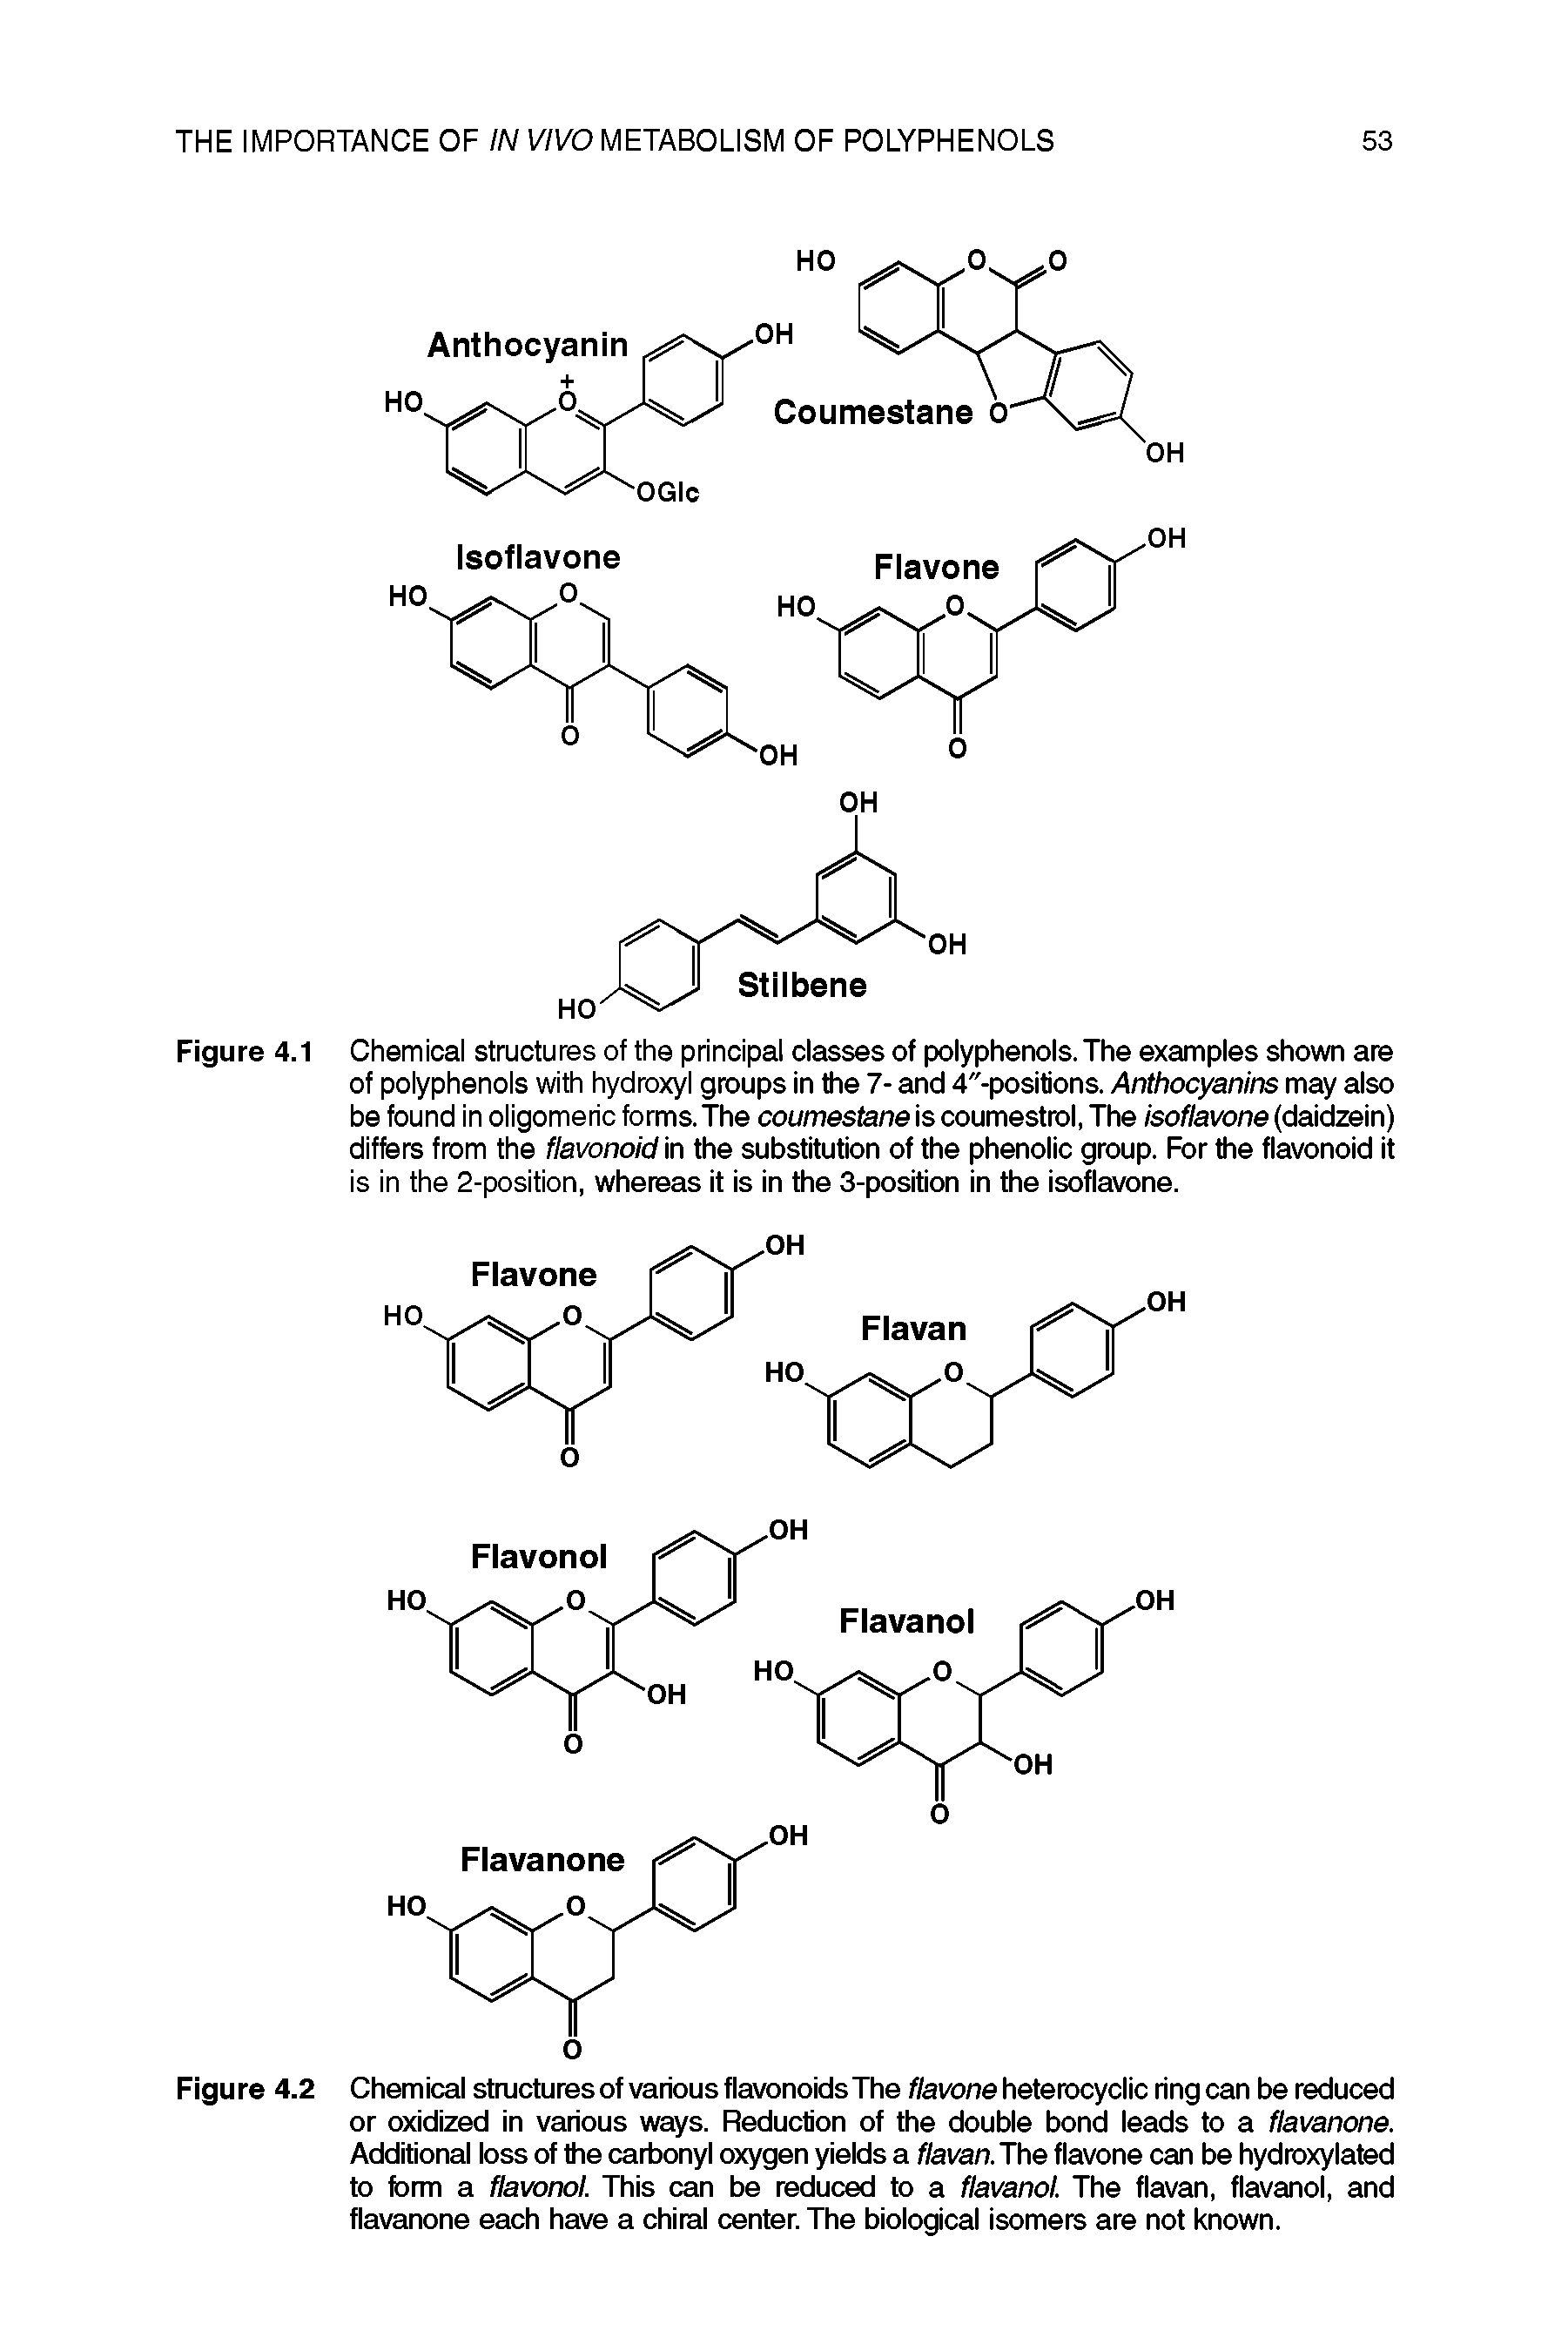 Figure 4.2 Chemical structures of various flavonoidsThe flavone heterocyclic ring can be reduced or oxidized in various ways. Reduction of the double bond leads to a flavanone. Additional loss of the carbonyl oxygen yields a flavan.Jhe flavone can be hydroxylated to form a flavonol. This can be reduced to a flavanol. The flavan, flavanol, and flavanone each have a chiral center. The biological isomers are not known.